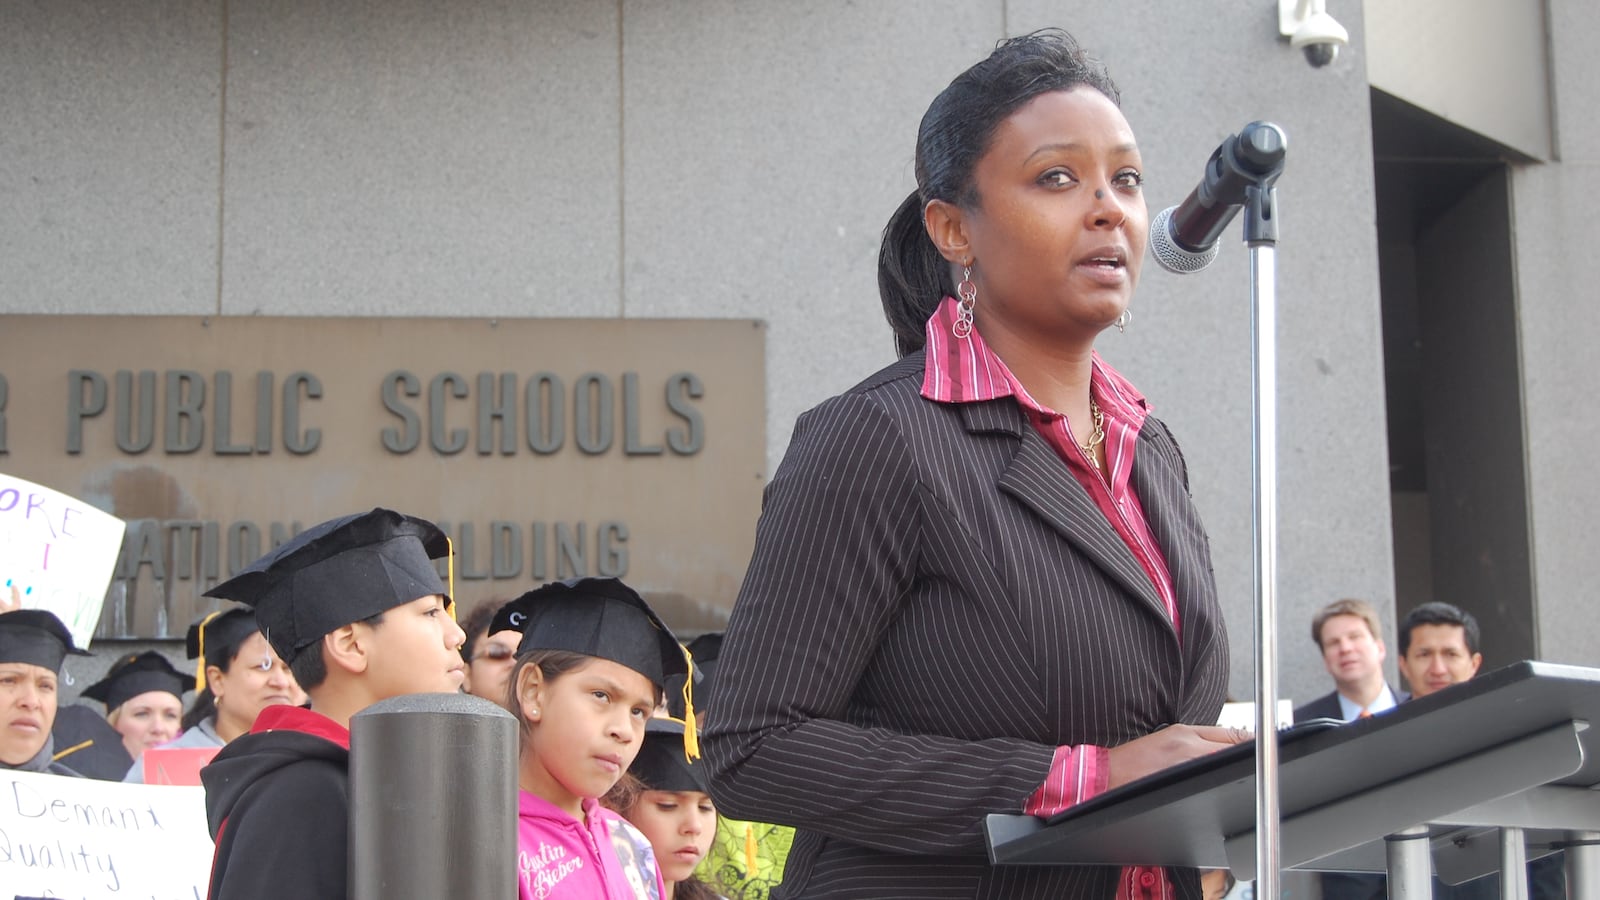 DPS parent MiDian Holmes spoke at a Thursday rally supporting the district's reform proposals.